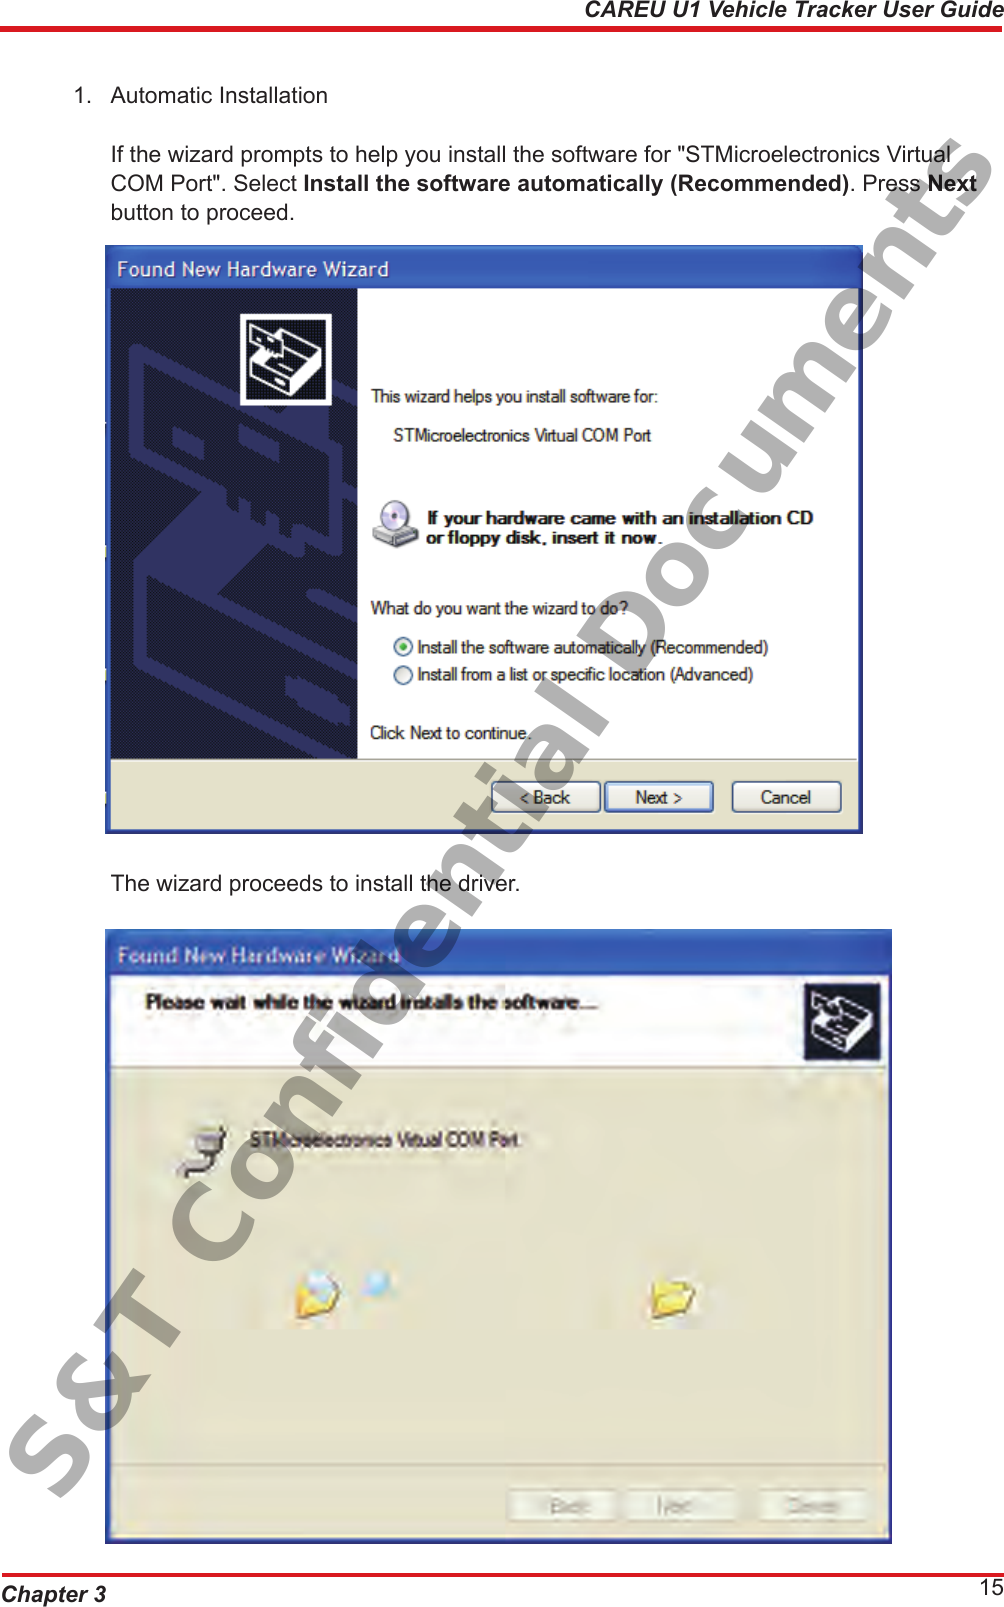 Chapter 3 15CAREU U1 Vehicle Tracker User Guide   1.  Automatic Installation   If the wizard prompts to help you install the software for &quot;STMicroelectronics Virtual      COM Port&quot;. Select Install the software automatically (Recommended). Press Next    button to proceed.   The wizard proceeds to install the driver. S&amp;T Confidential Documents